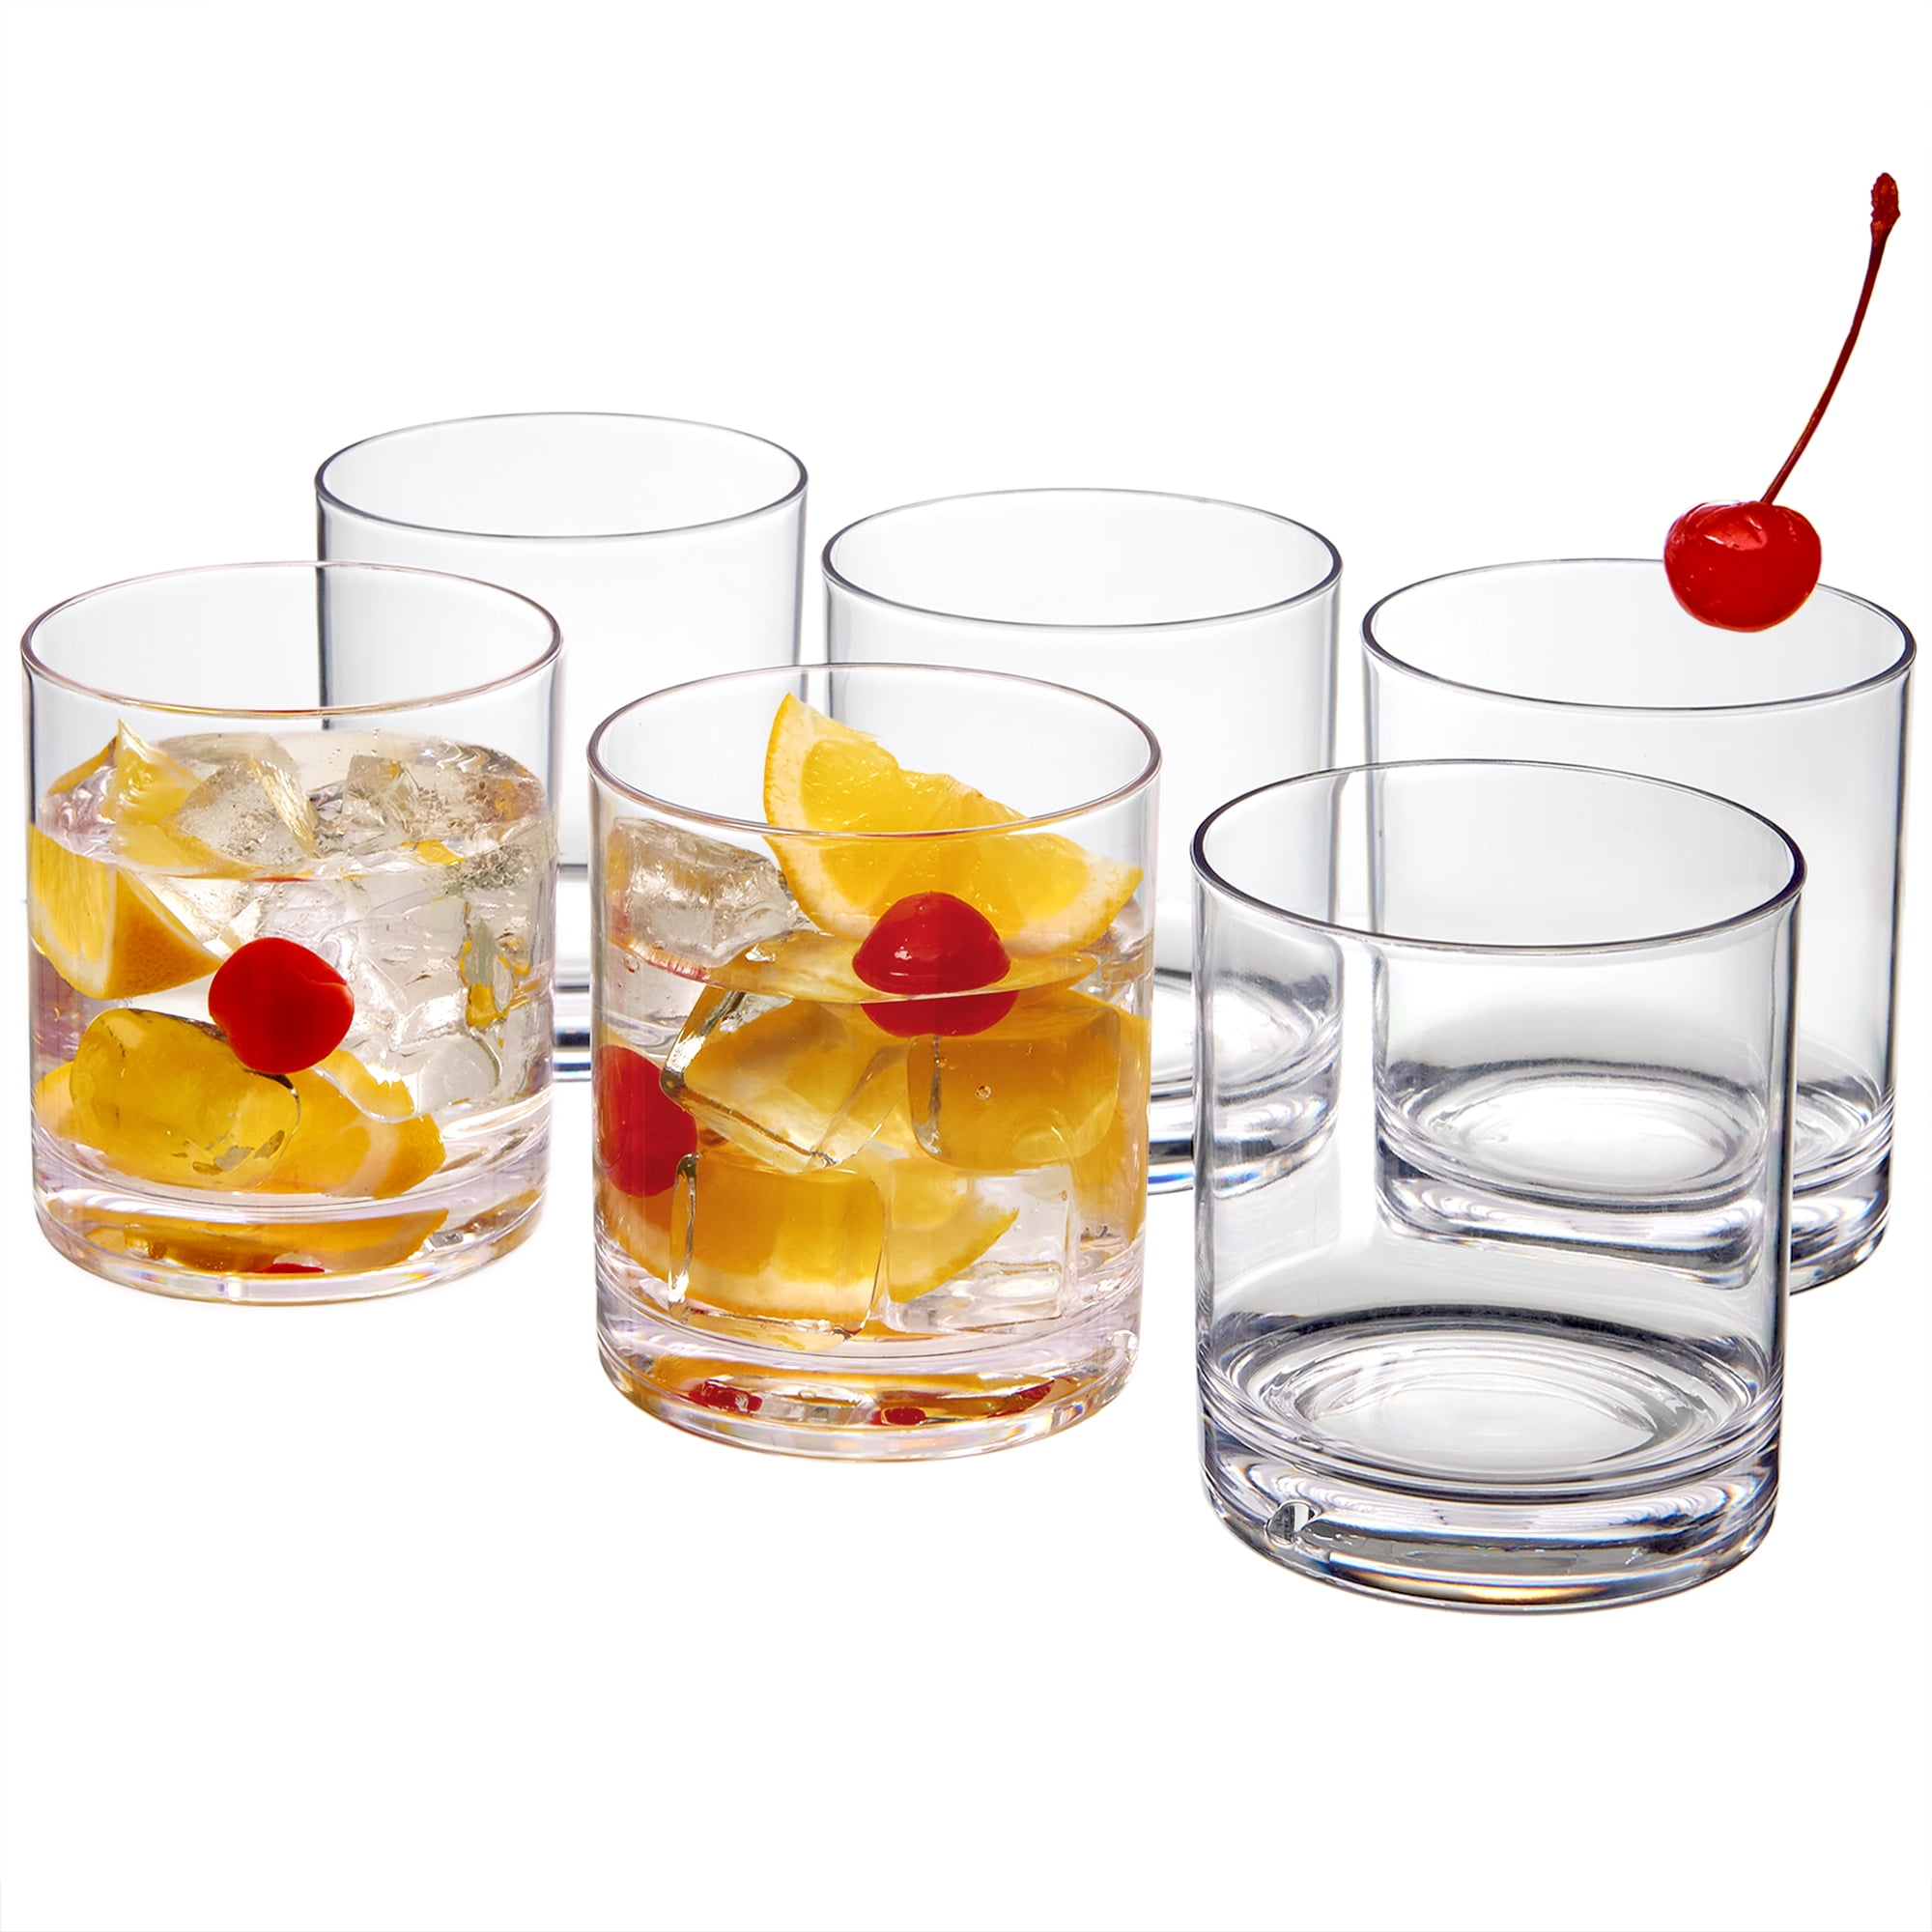 Peppy People Drinking Glasses - 2 Patterns - Cute Kitchen Essentials from  Apollo Box